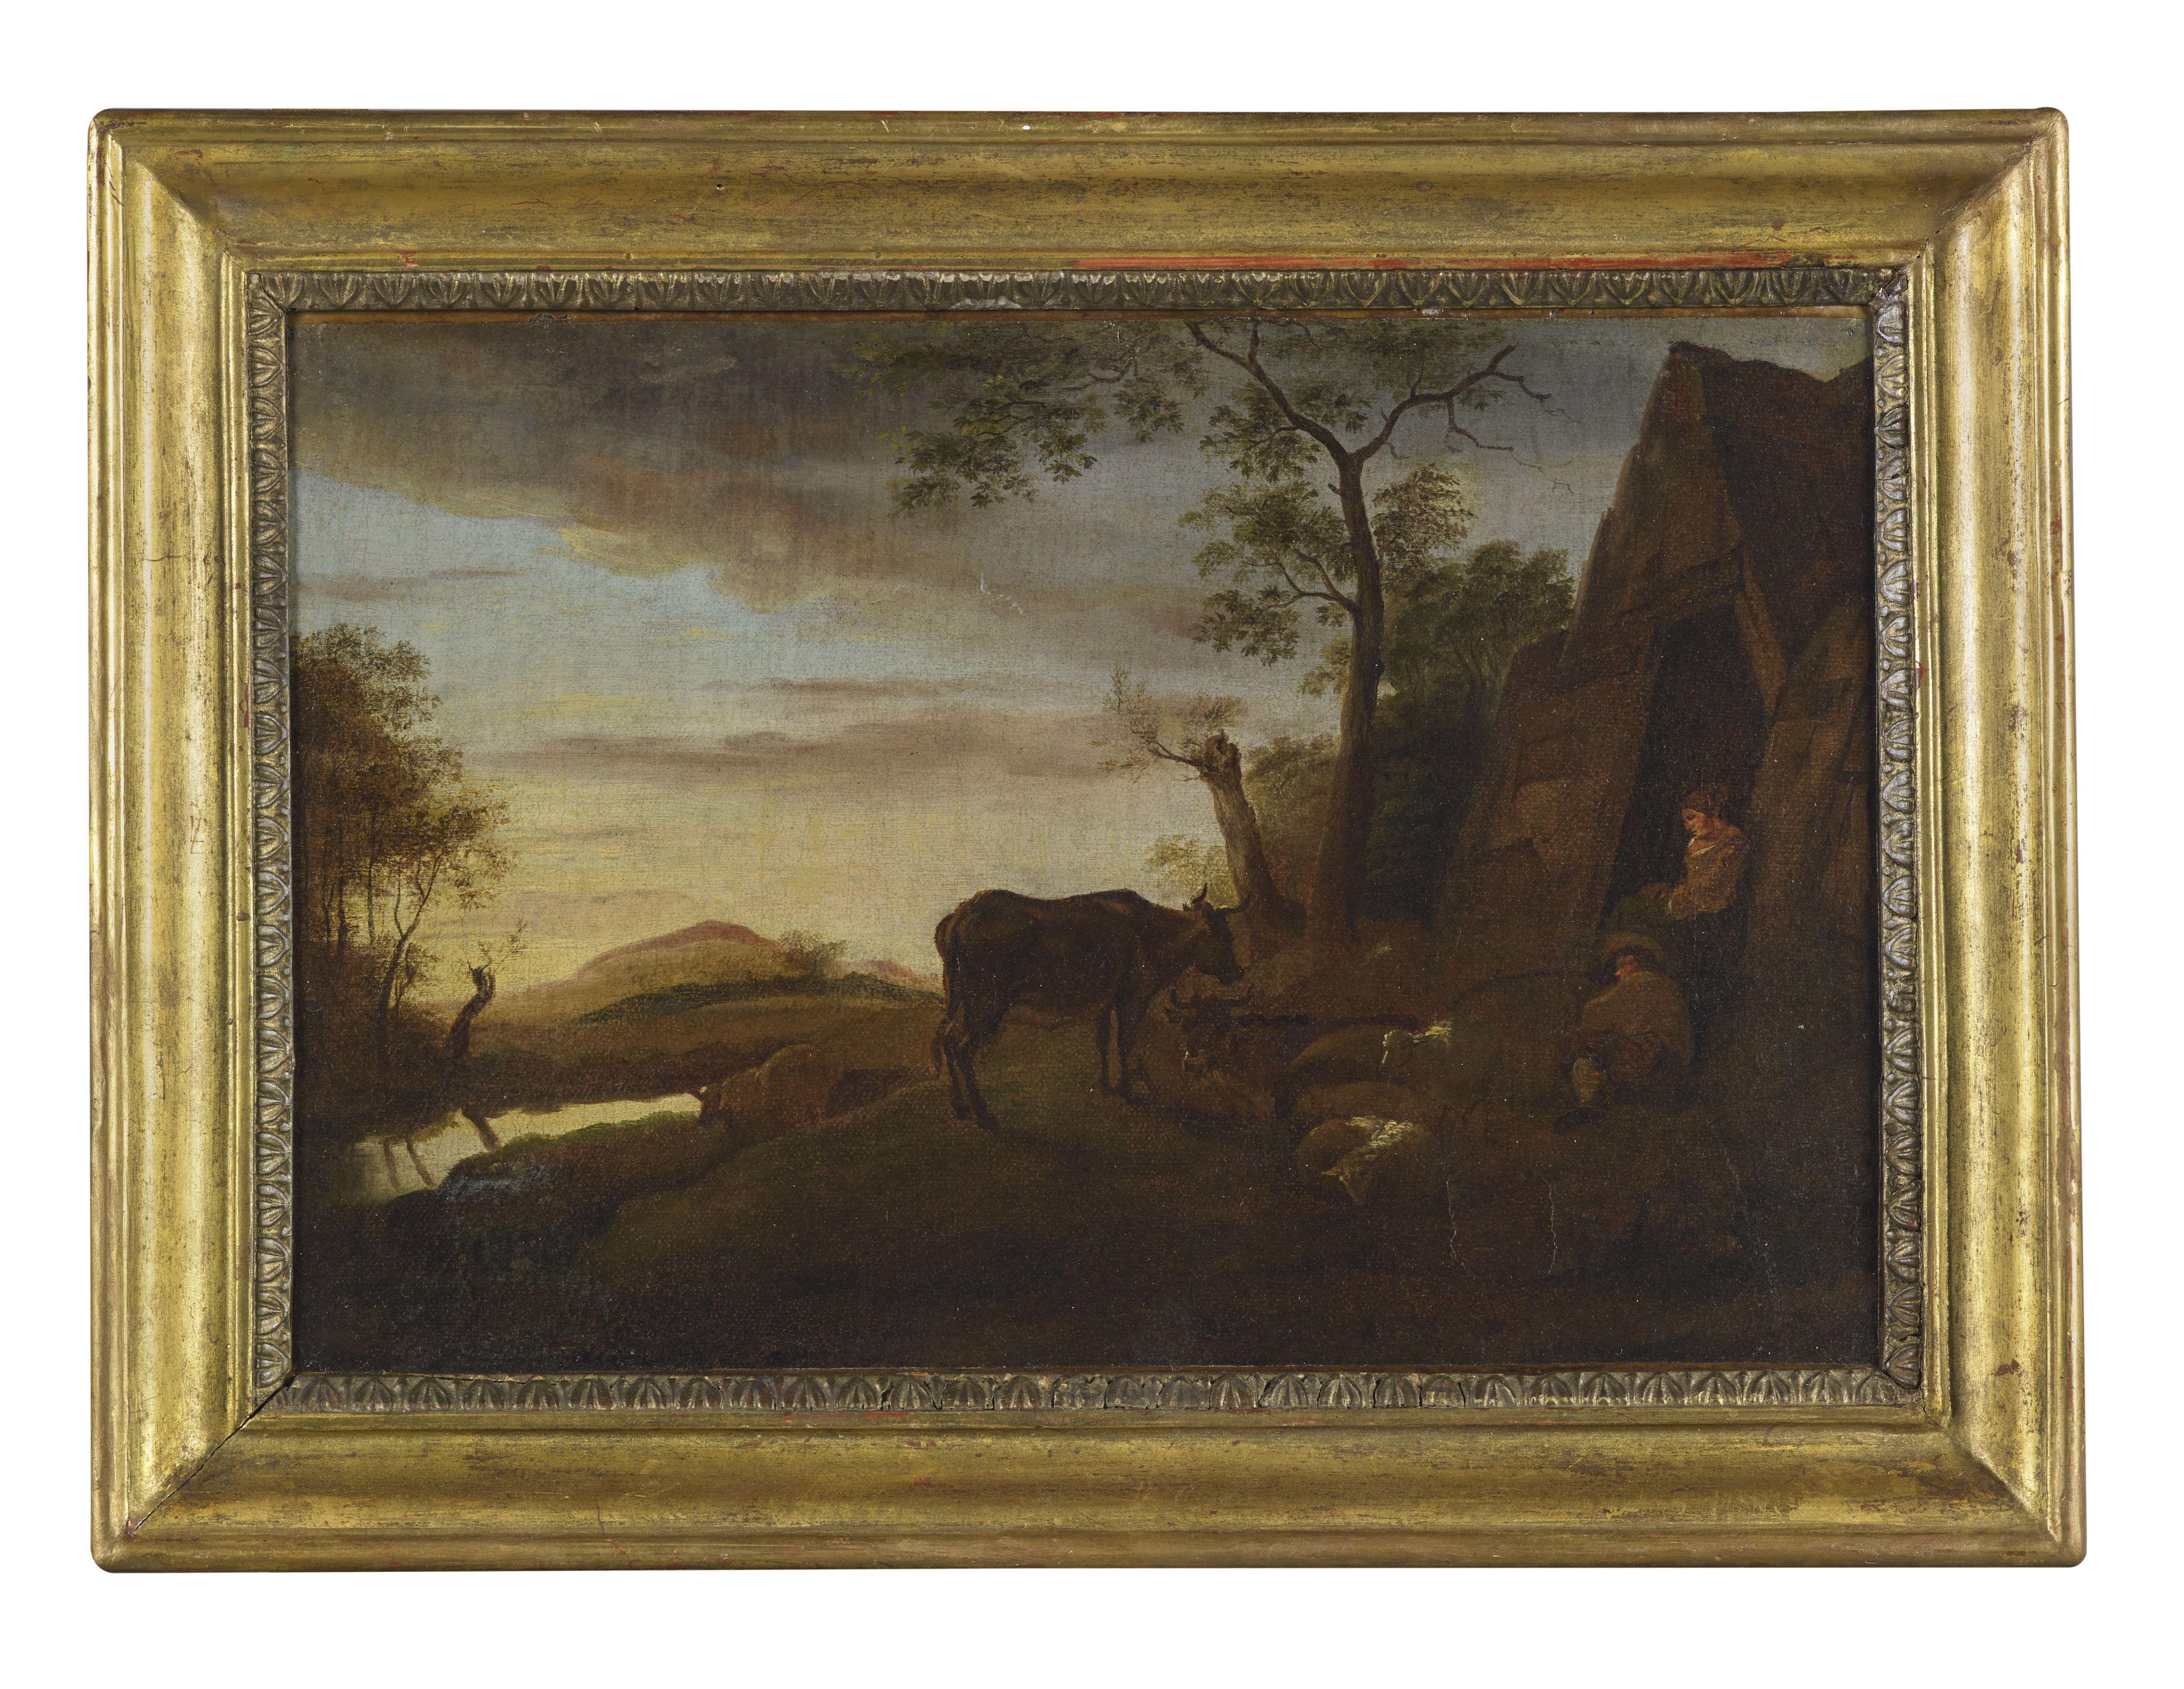 Unknown Landscape Painting - 18th Century Landscape Flemish School People and Cows Oil on Canvas Green